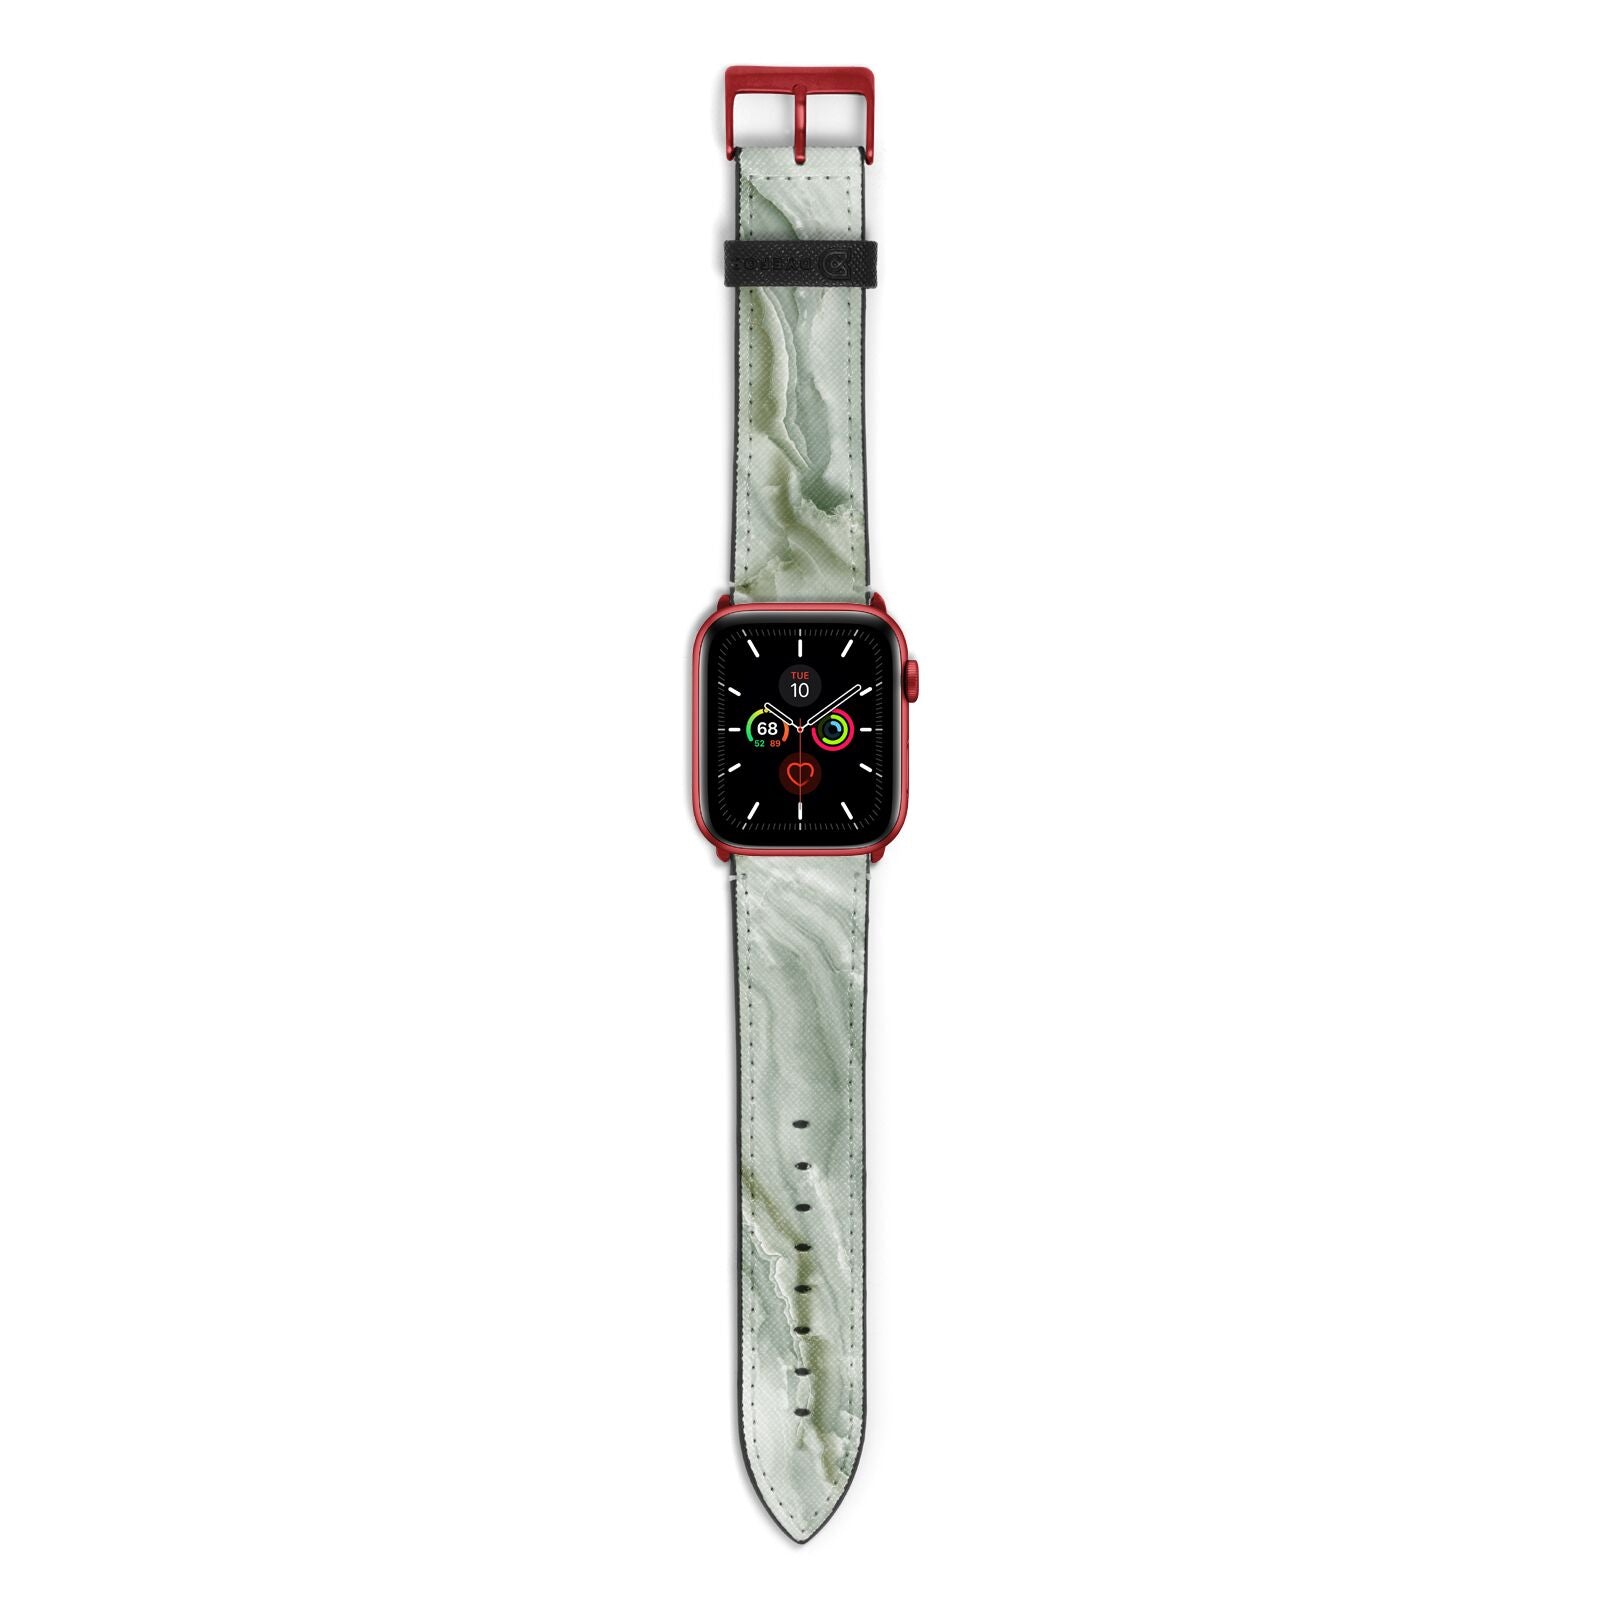 Pistachio Green Marble Apple Watch Strap with Red Hardware